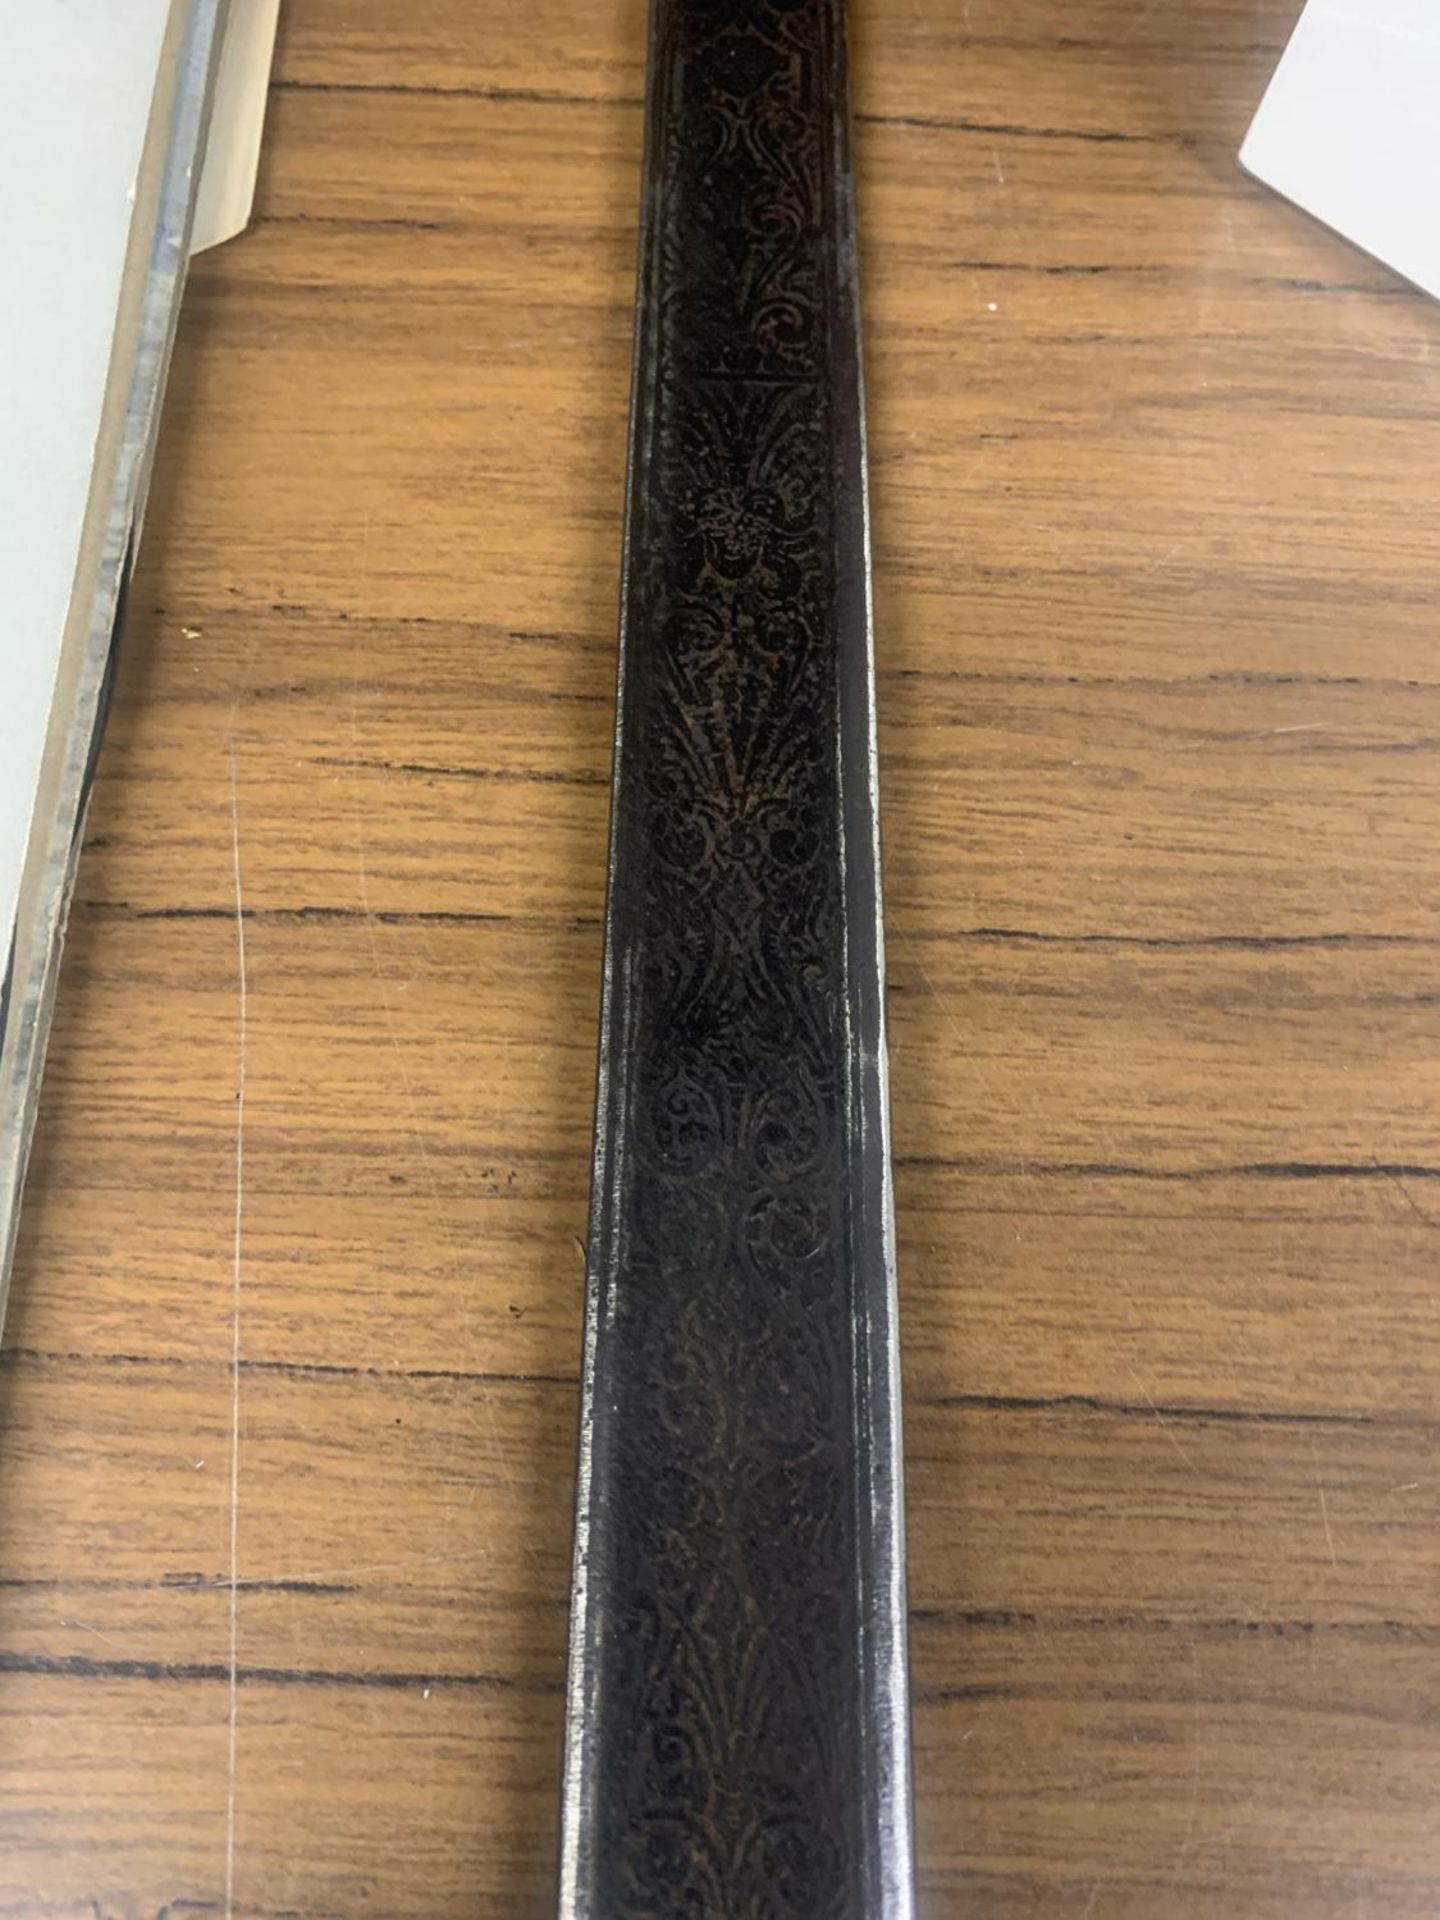 A SPANISH ENGRAVED SWORD - Image 3 of 3